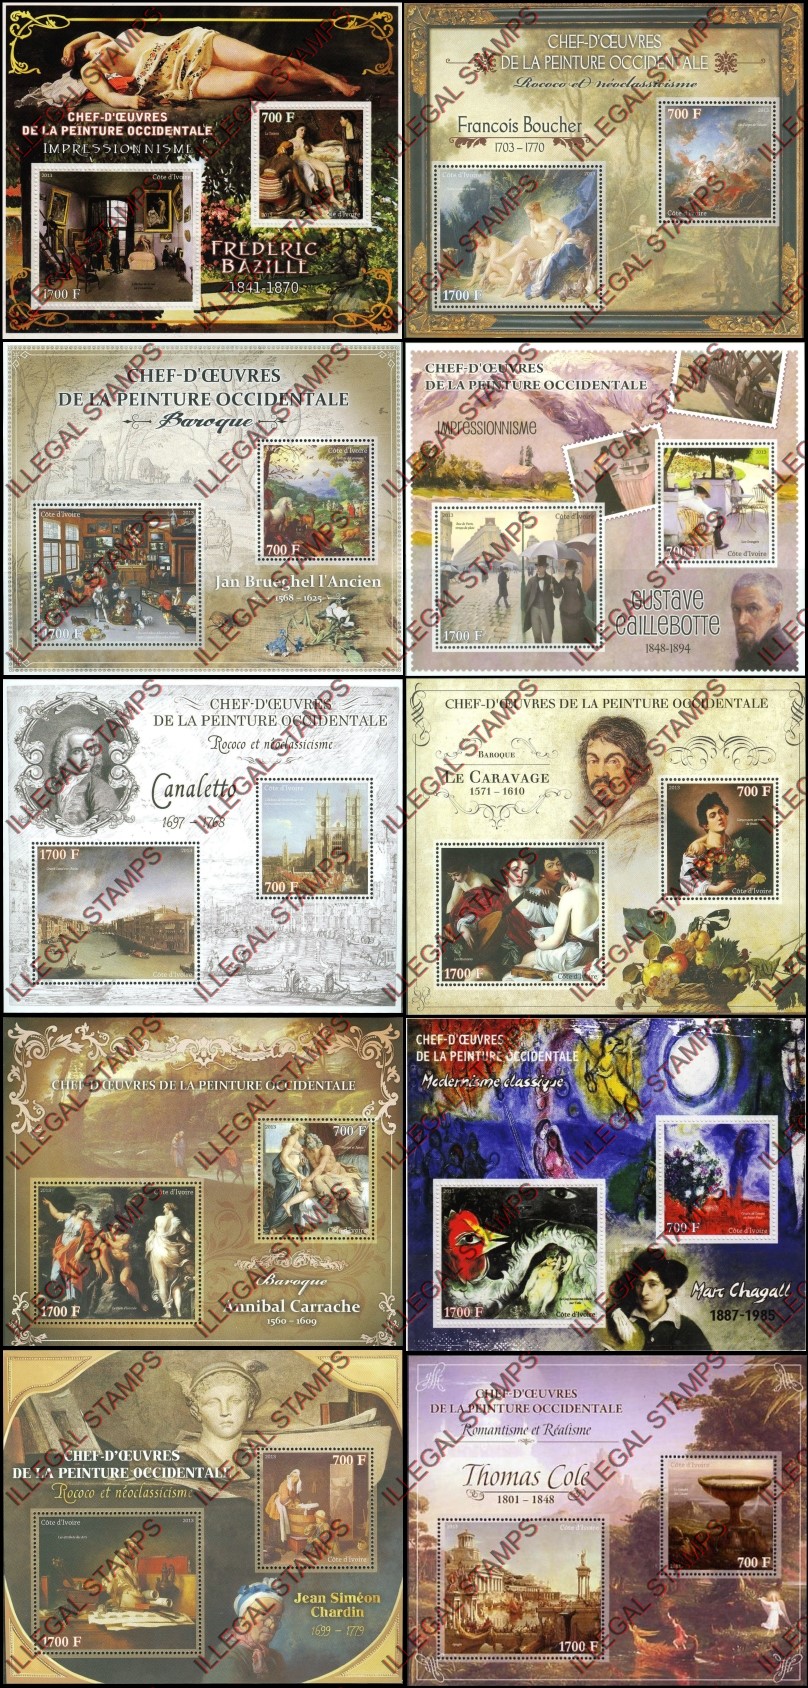 Ivory Coast 2013 Art Impressionism Paintings Illegal Stamp Souvenir Sheets of 2 (part 1)